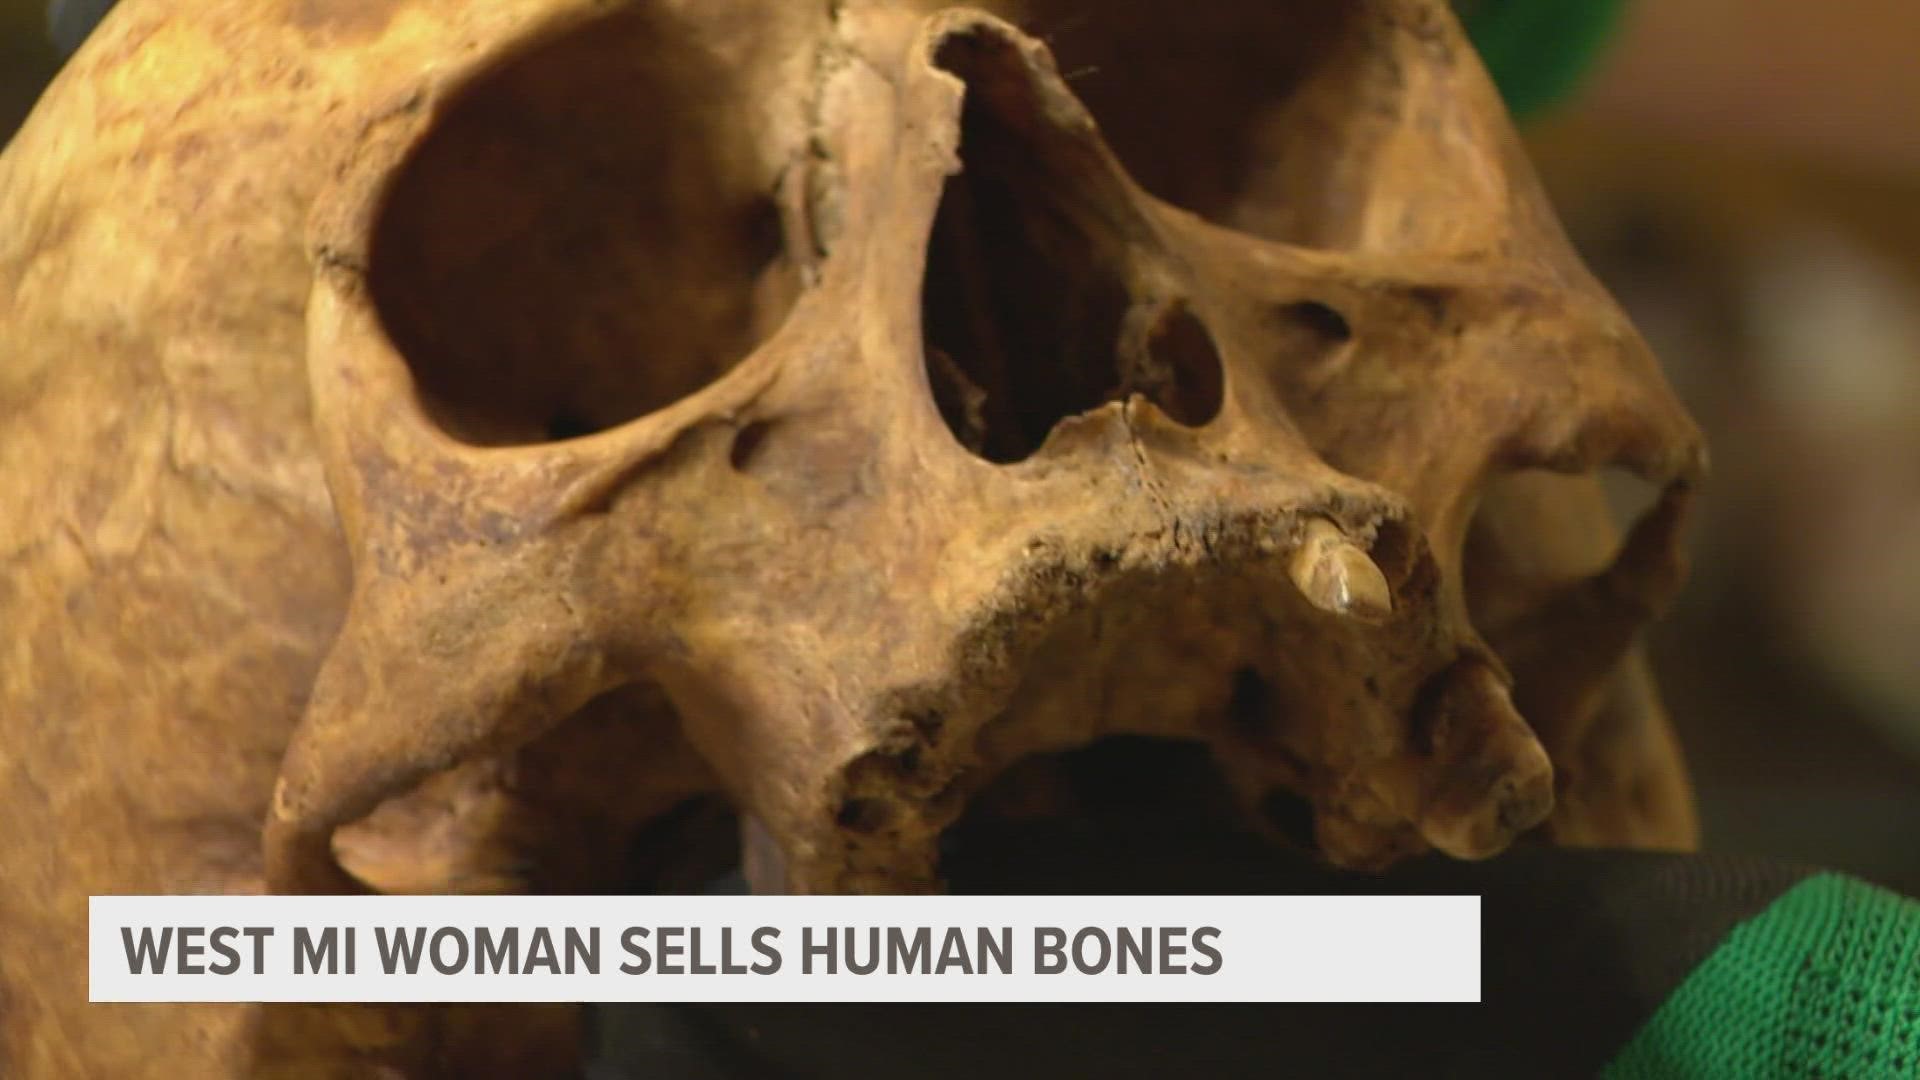 There is no federal law preventing the sale of human remains. Three states have restrictions, but Michigan is not one of them.